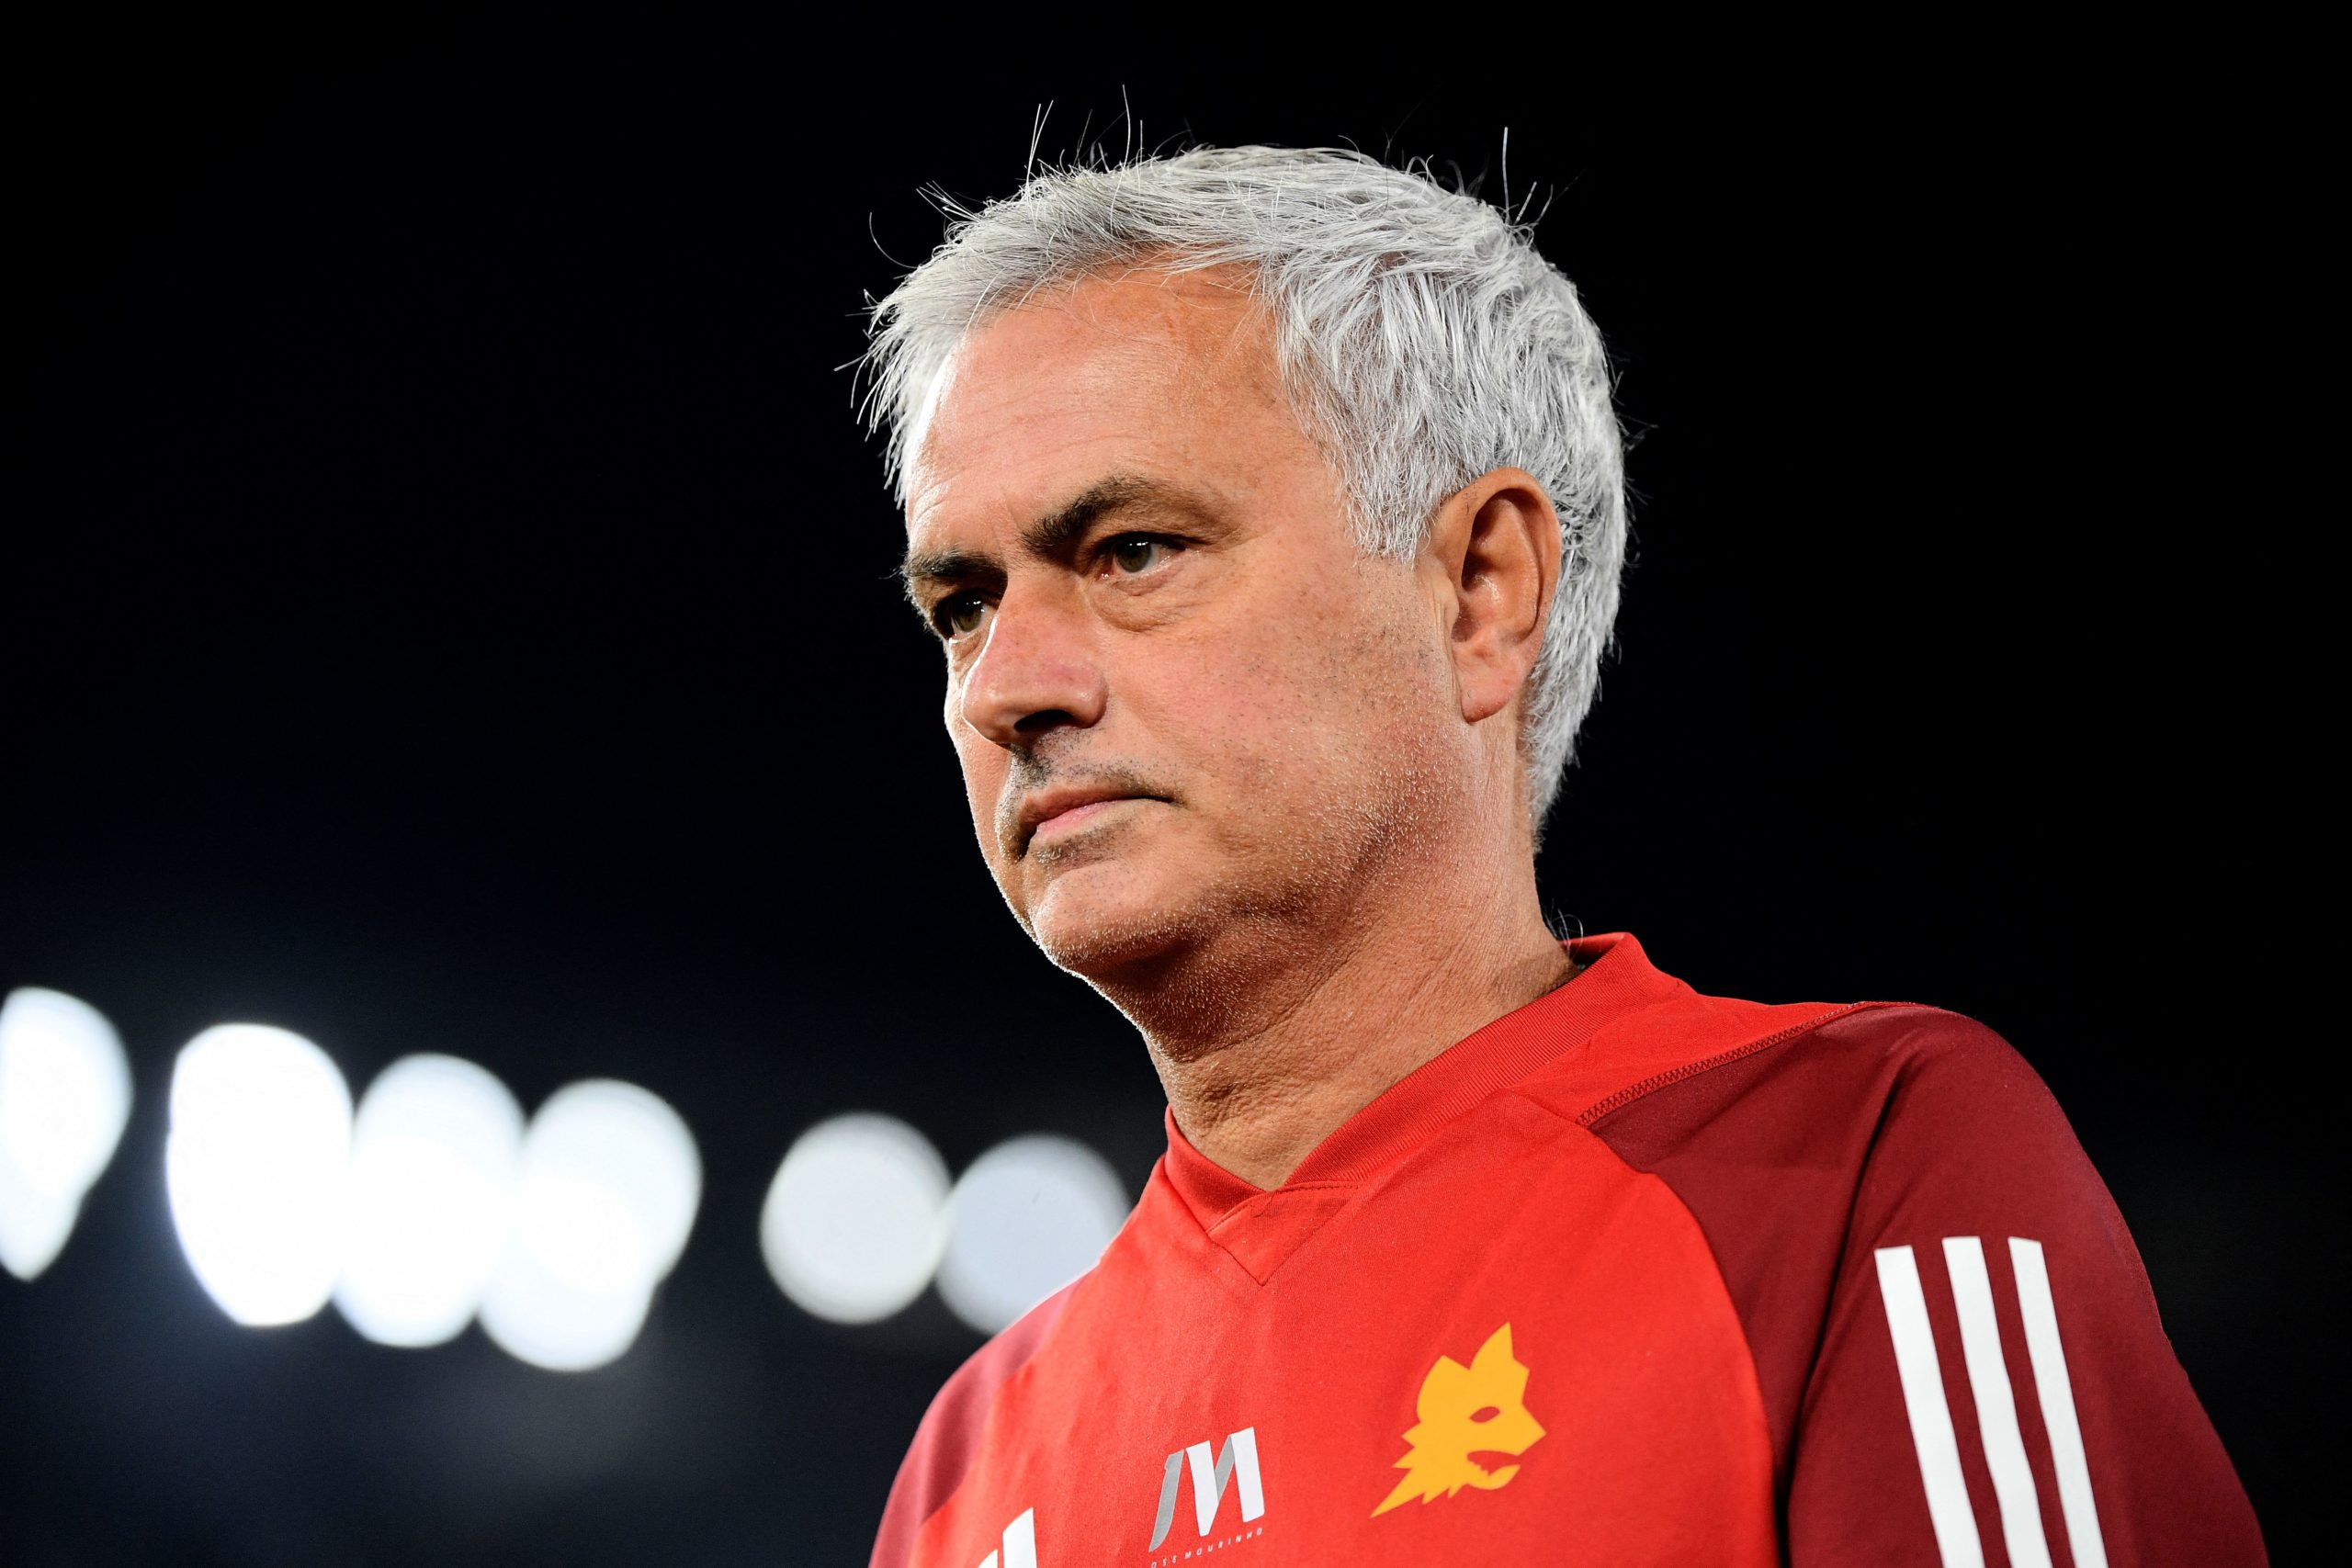 Josè Mourinho is wary it will take more effort from his side to register a positive victory in next week’s Derby della Capitale against Lazio.